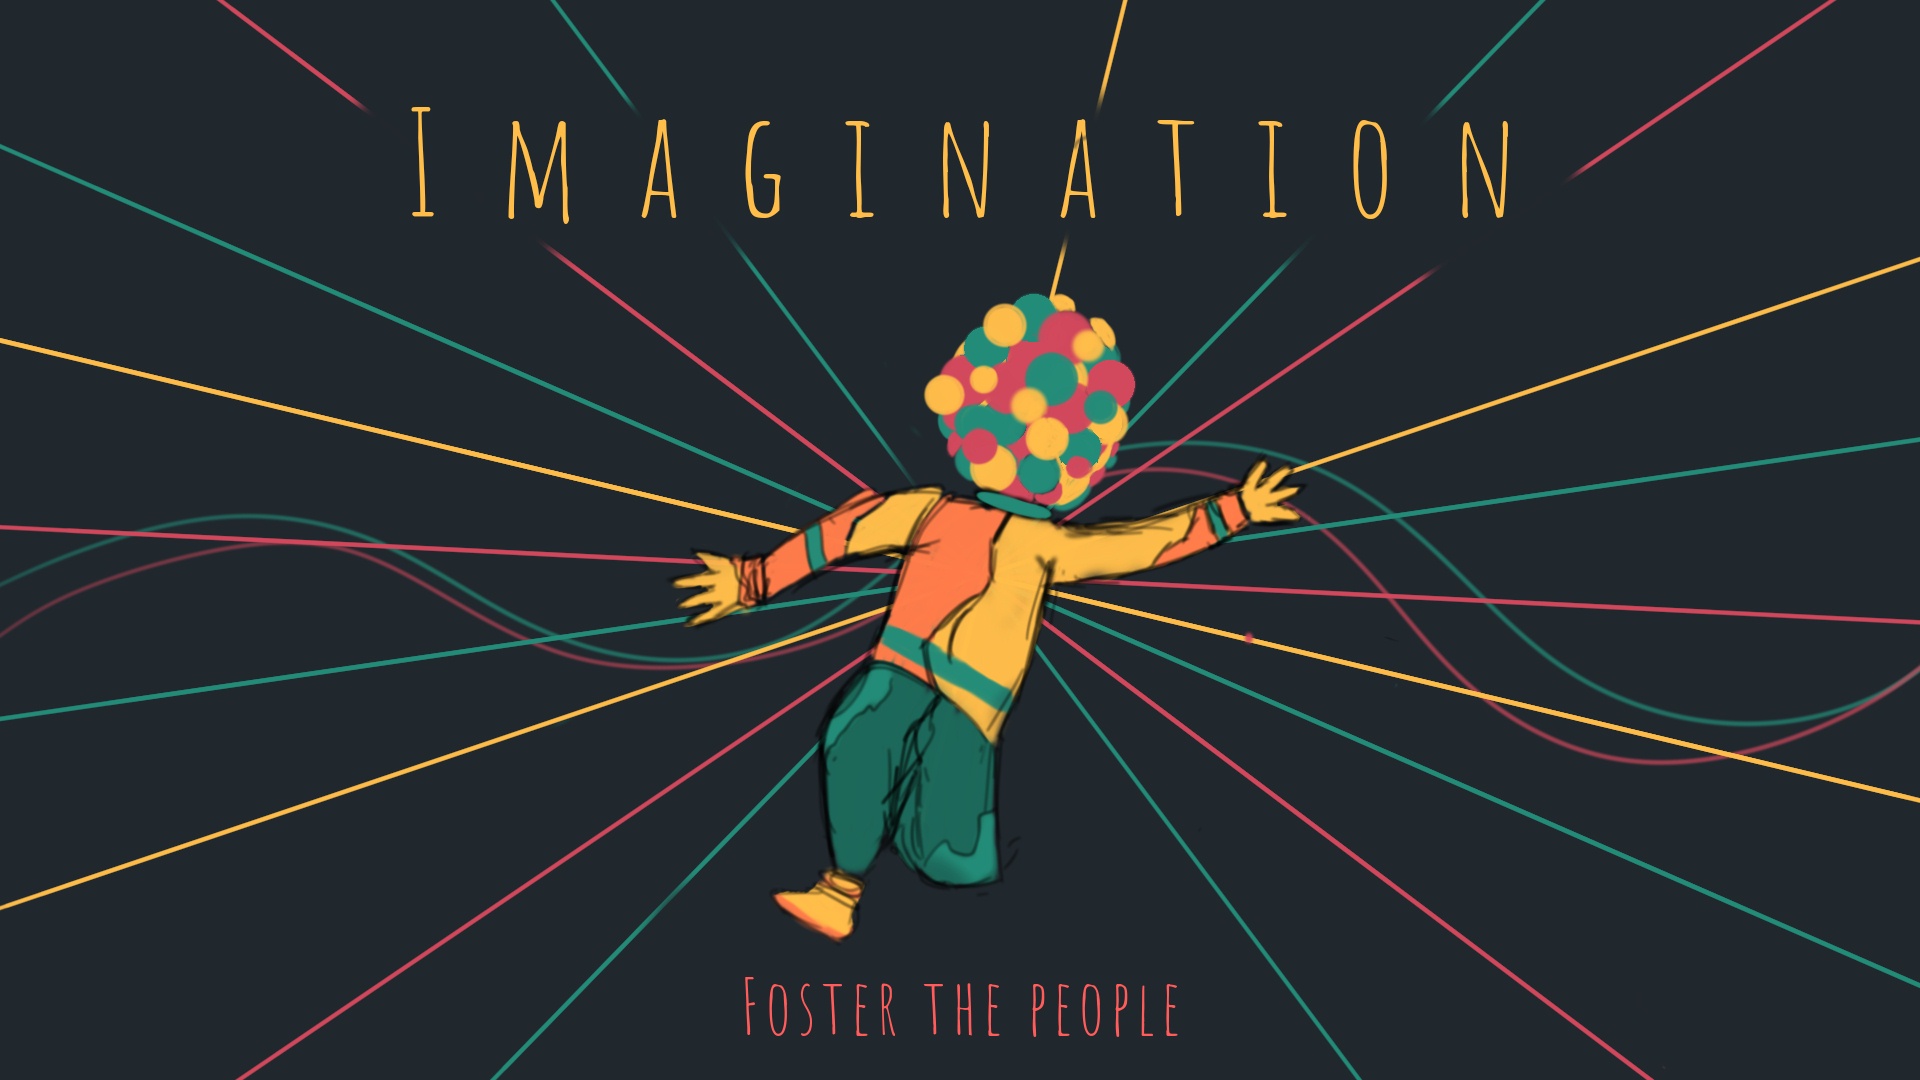 Foster The People Imagination - HD Wallpaper 